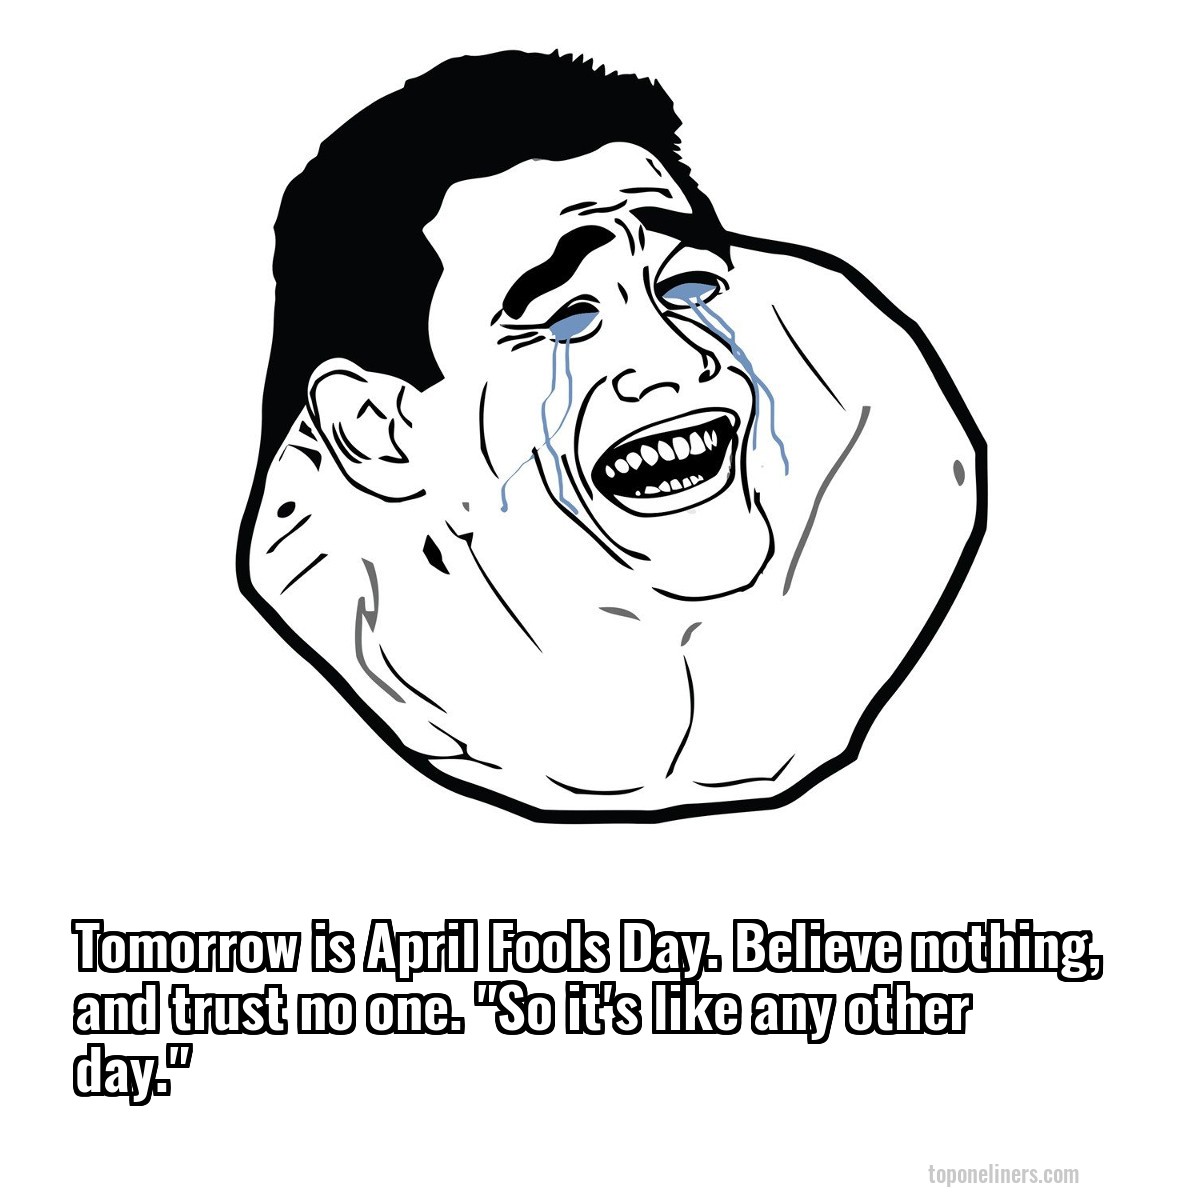 Tomorrow is April Fools Day. Believe nothing, and trust no one. "So it's like any other day."
